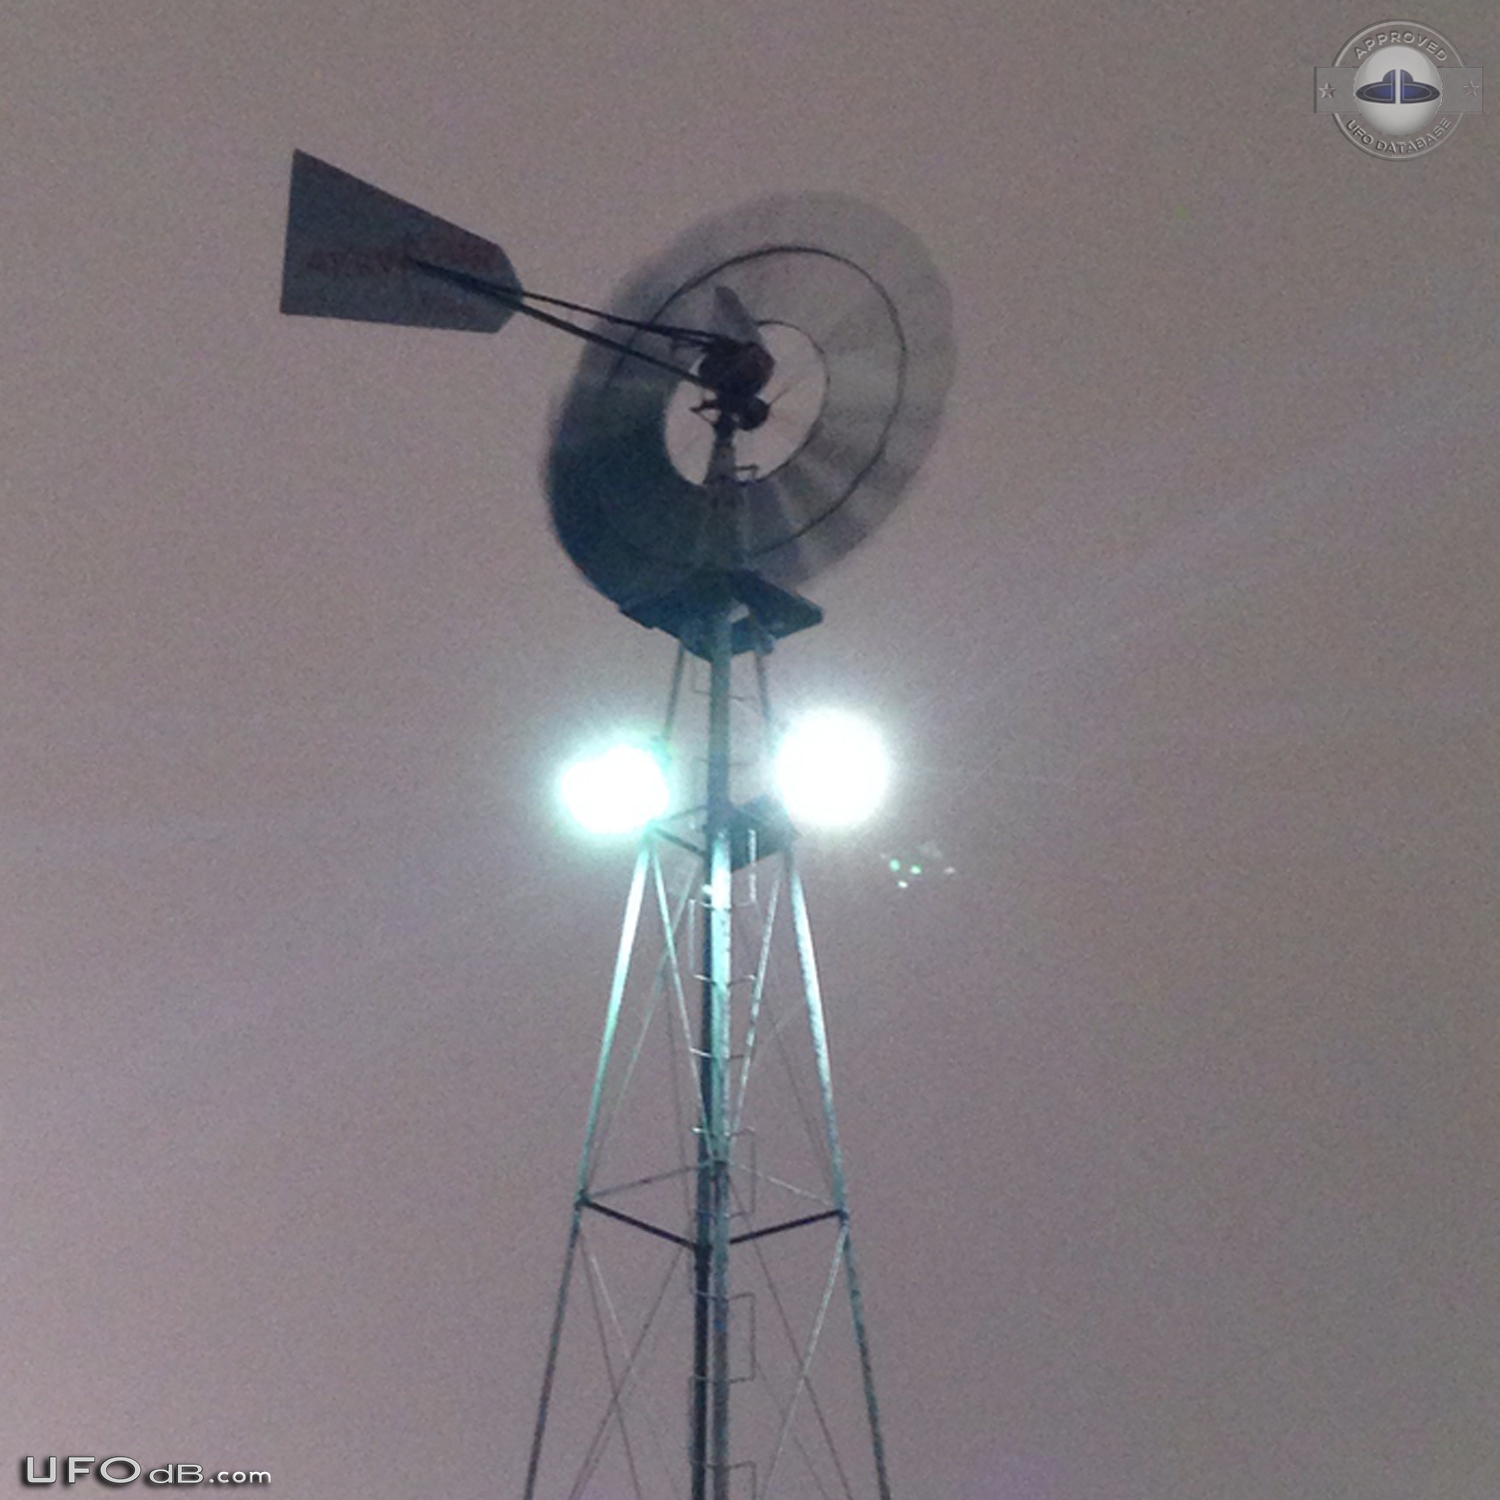 Diamond UFO hiding in the storm caught on picture over Katy Texas 2014 UFO Picture #573-2